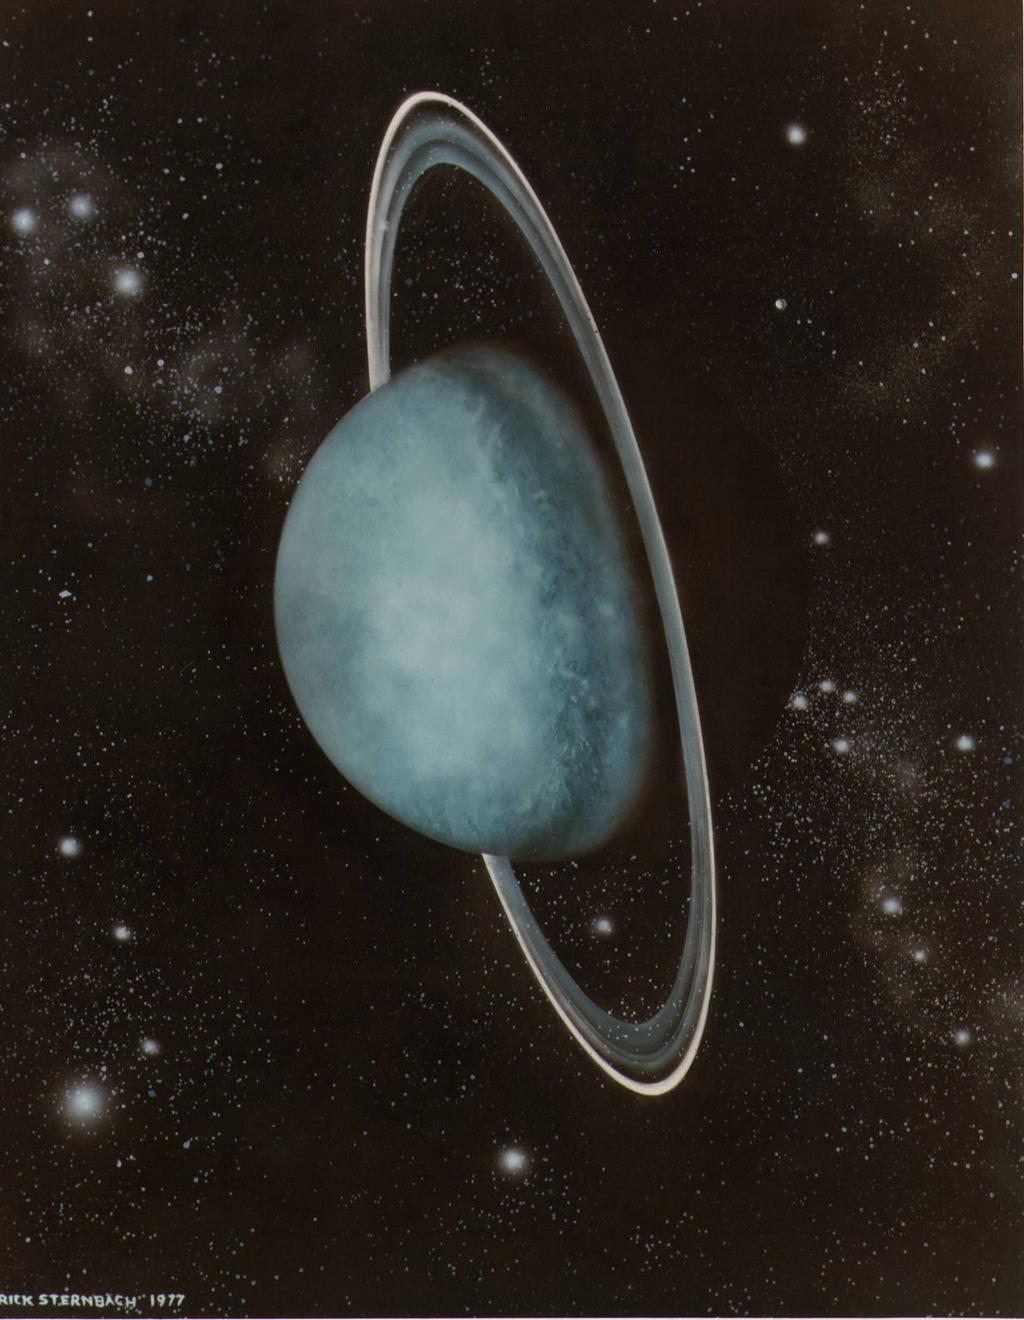 Uranus: The Sideways Planet A unique feature of Uranus is that it rotates on its side Instead of being generally